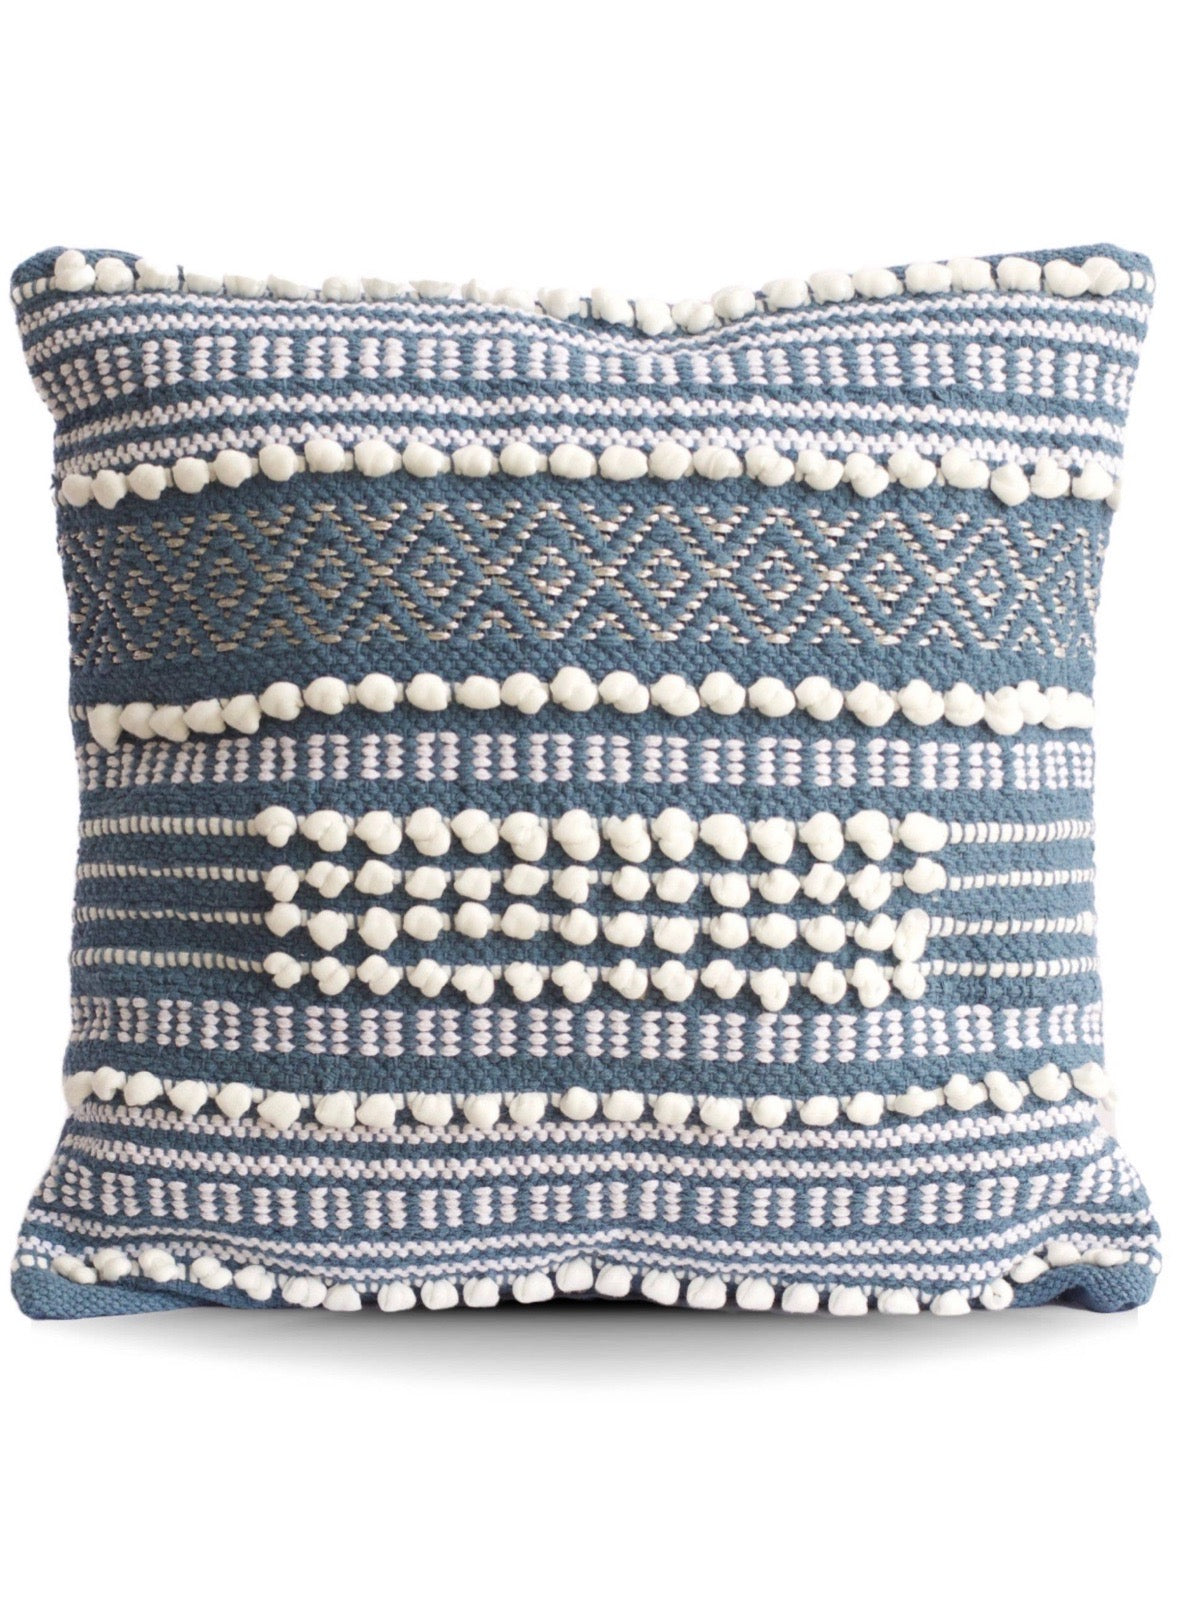 This 100% Cotton Moroccan Wedding decorative pillow is inspired by the special meaning behind the traditions of the Moroccan Wedding blanket. Measures 18x18 and Sold by KYA Home Decor